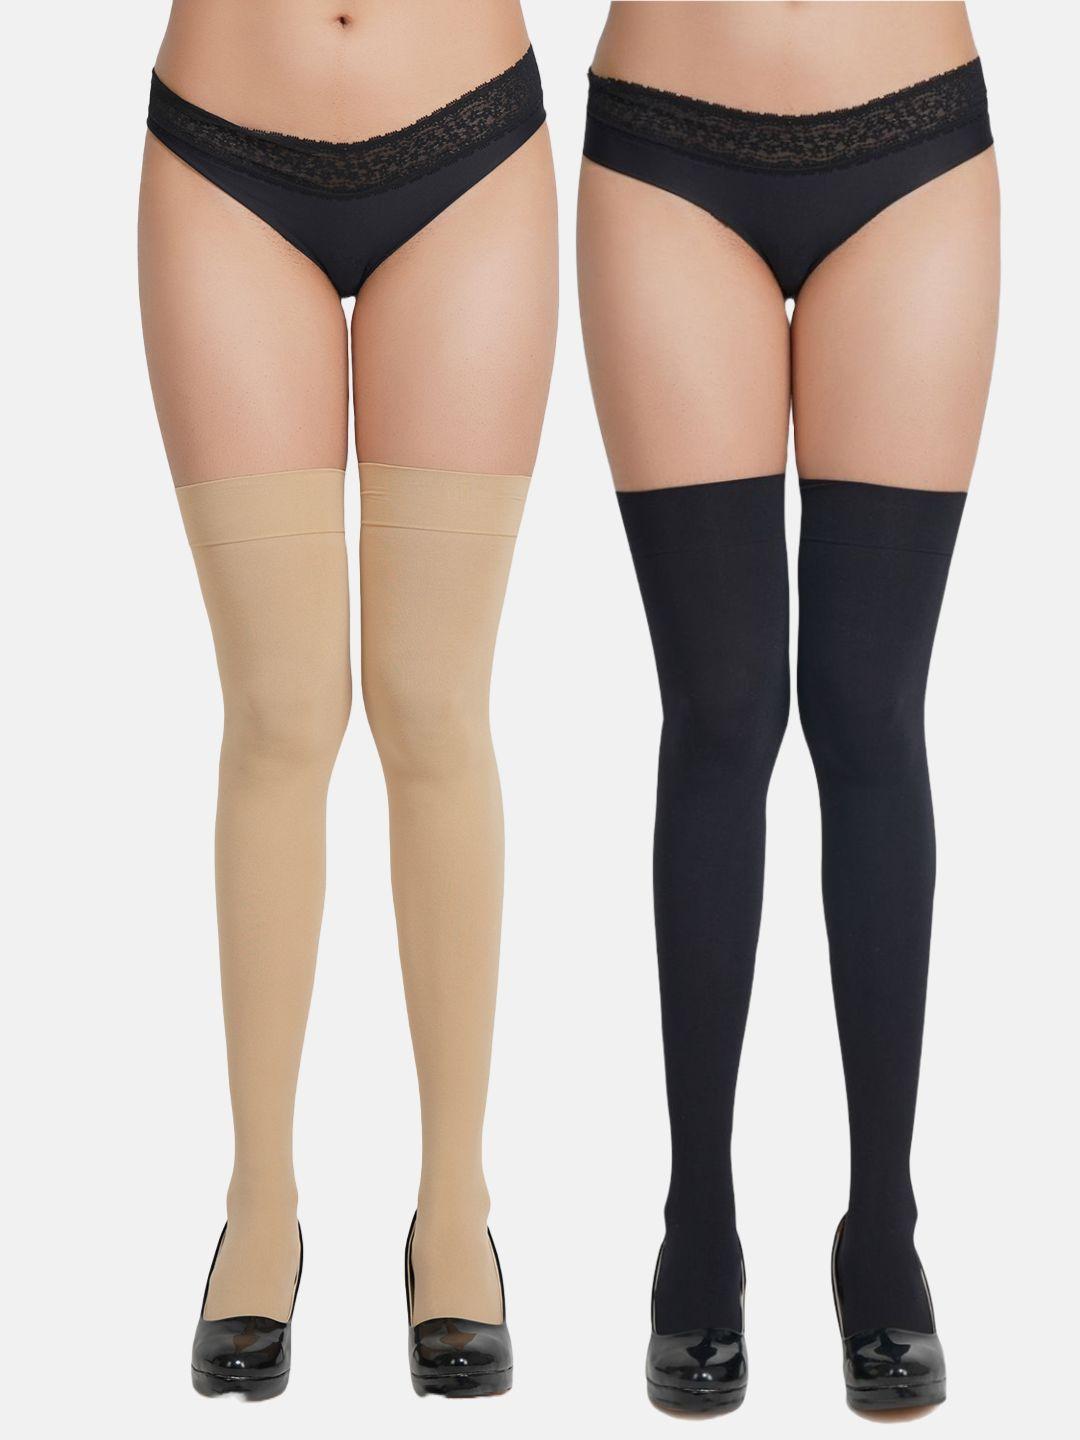 n2s next2skin women pack of 2 opaque thigh high stockings